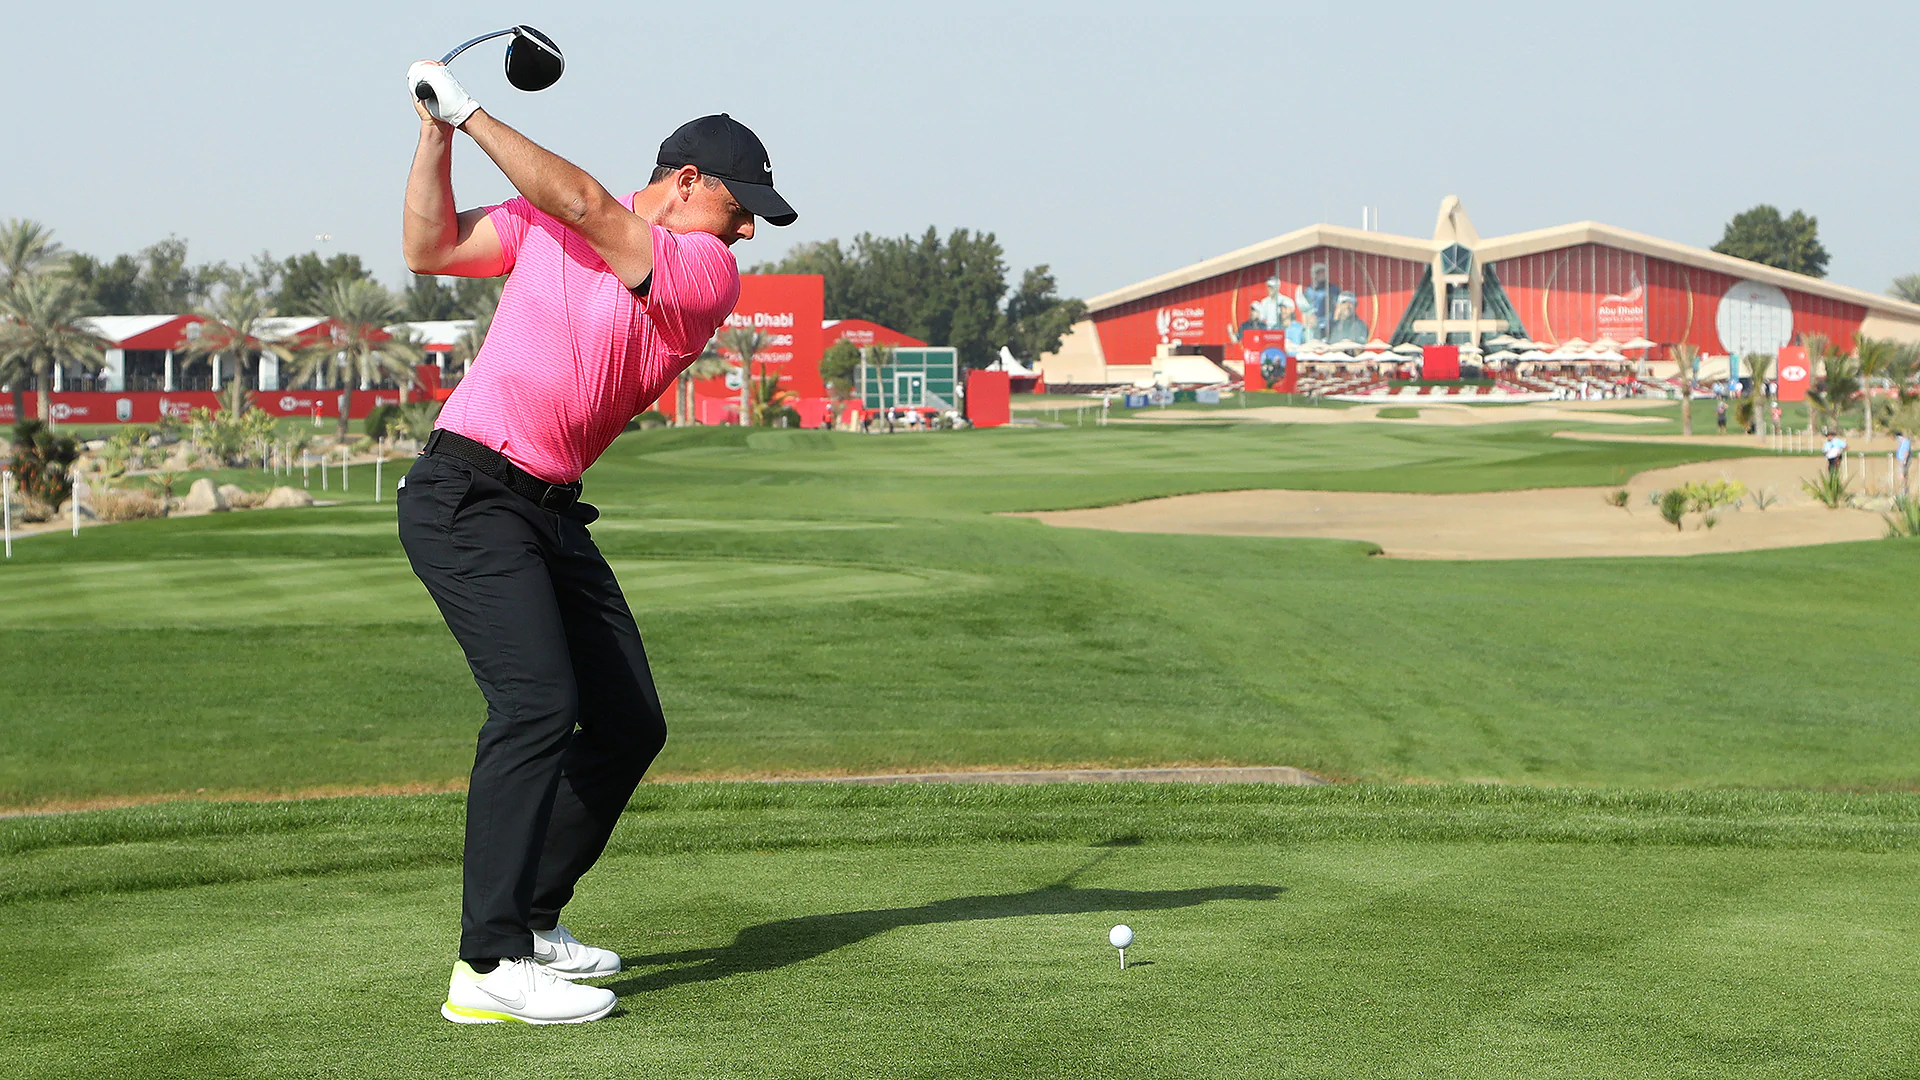 Armed with a little advice from Butch Harmon and lots of practice, Rory McIlroy fires 64 in Abu Dhabi